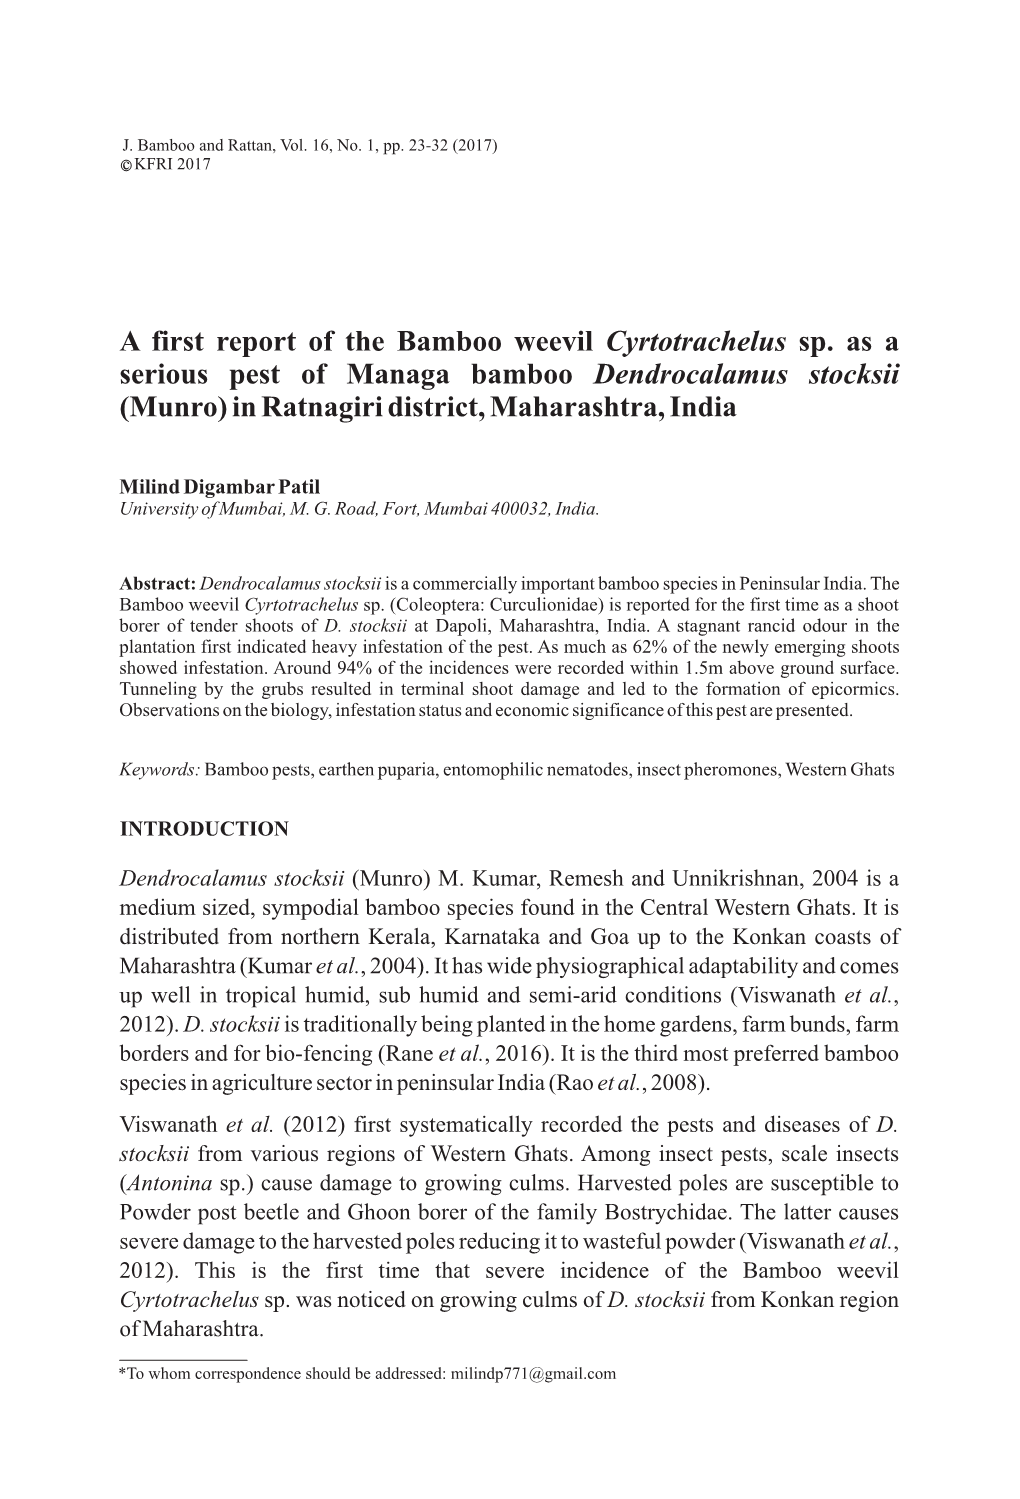 A First Report of the Bamboo Weevil Cyrtotrachelus Sp. As a Serious Pest of Managa Bamboo Dendrocalamus Stocksii (Munro) in Ratnagiri District, Maharashtra, India